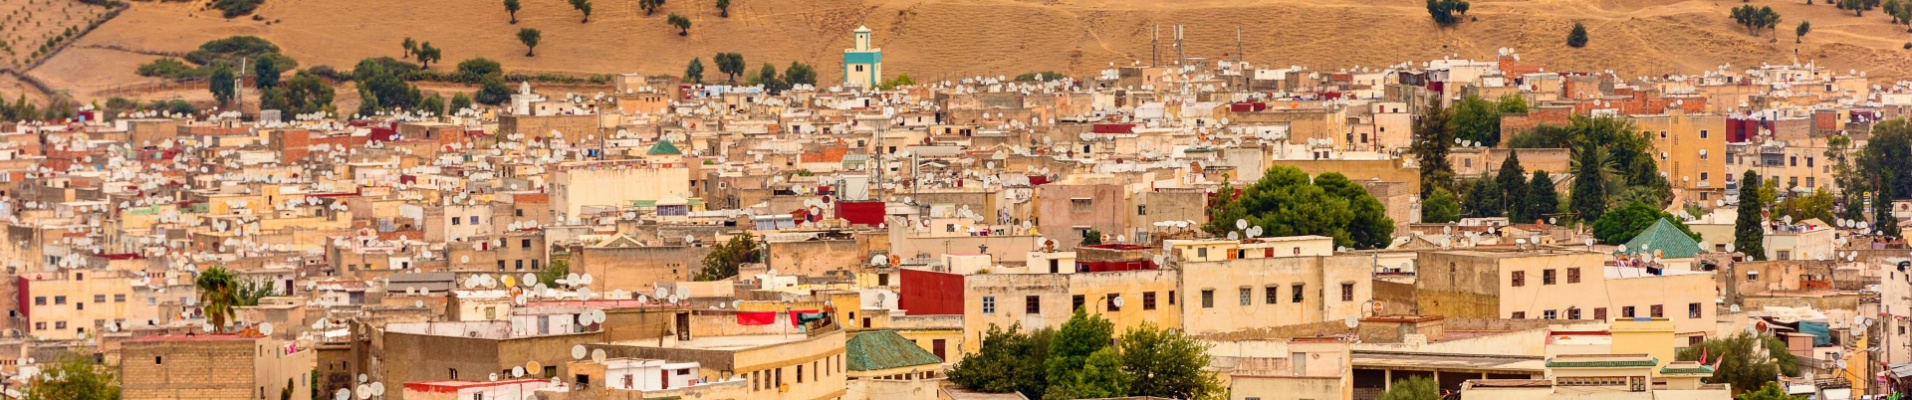 fez-and-the-north-of-morocco